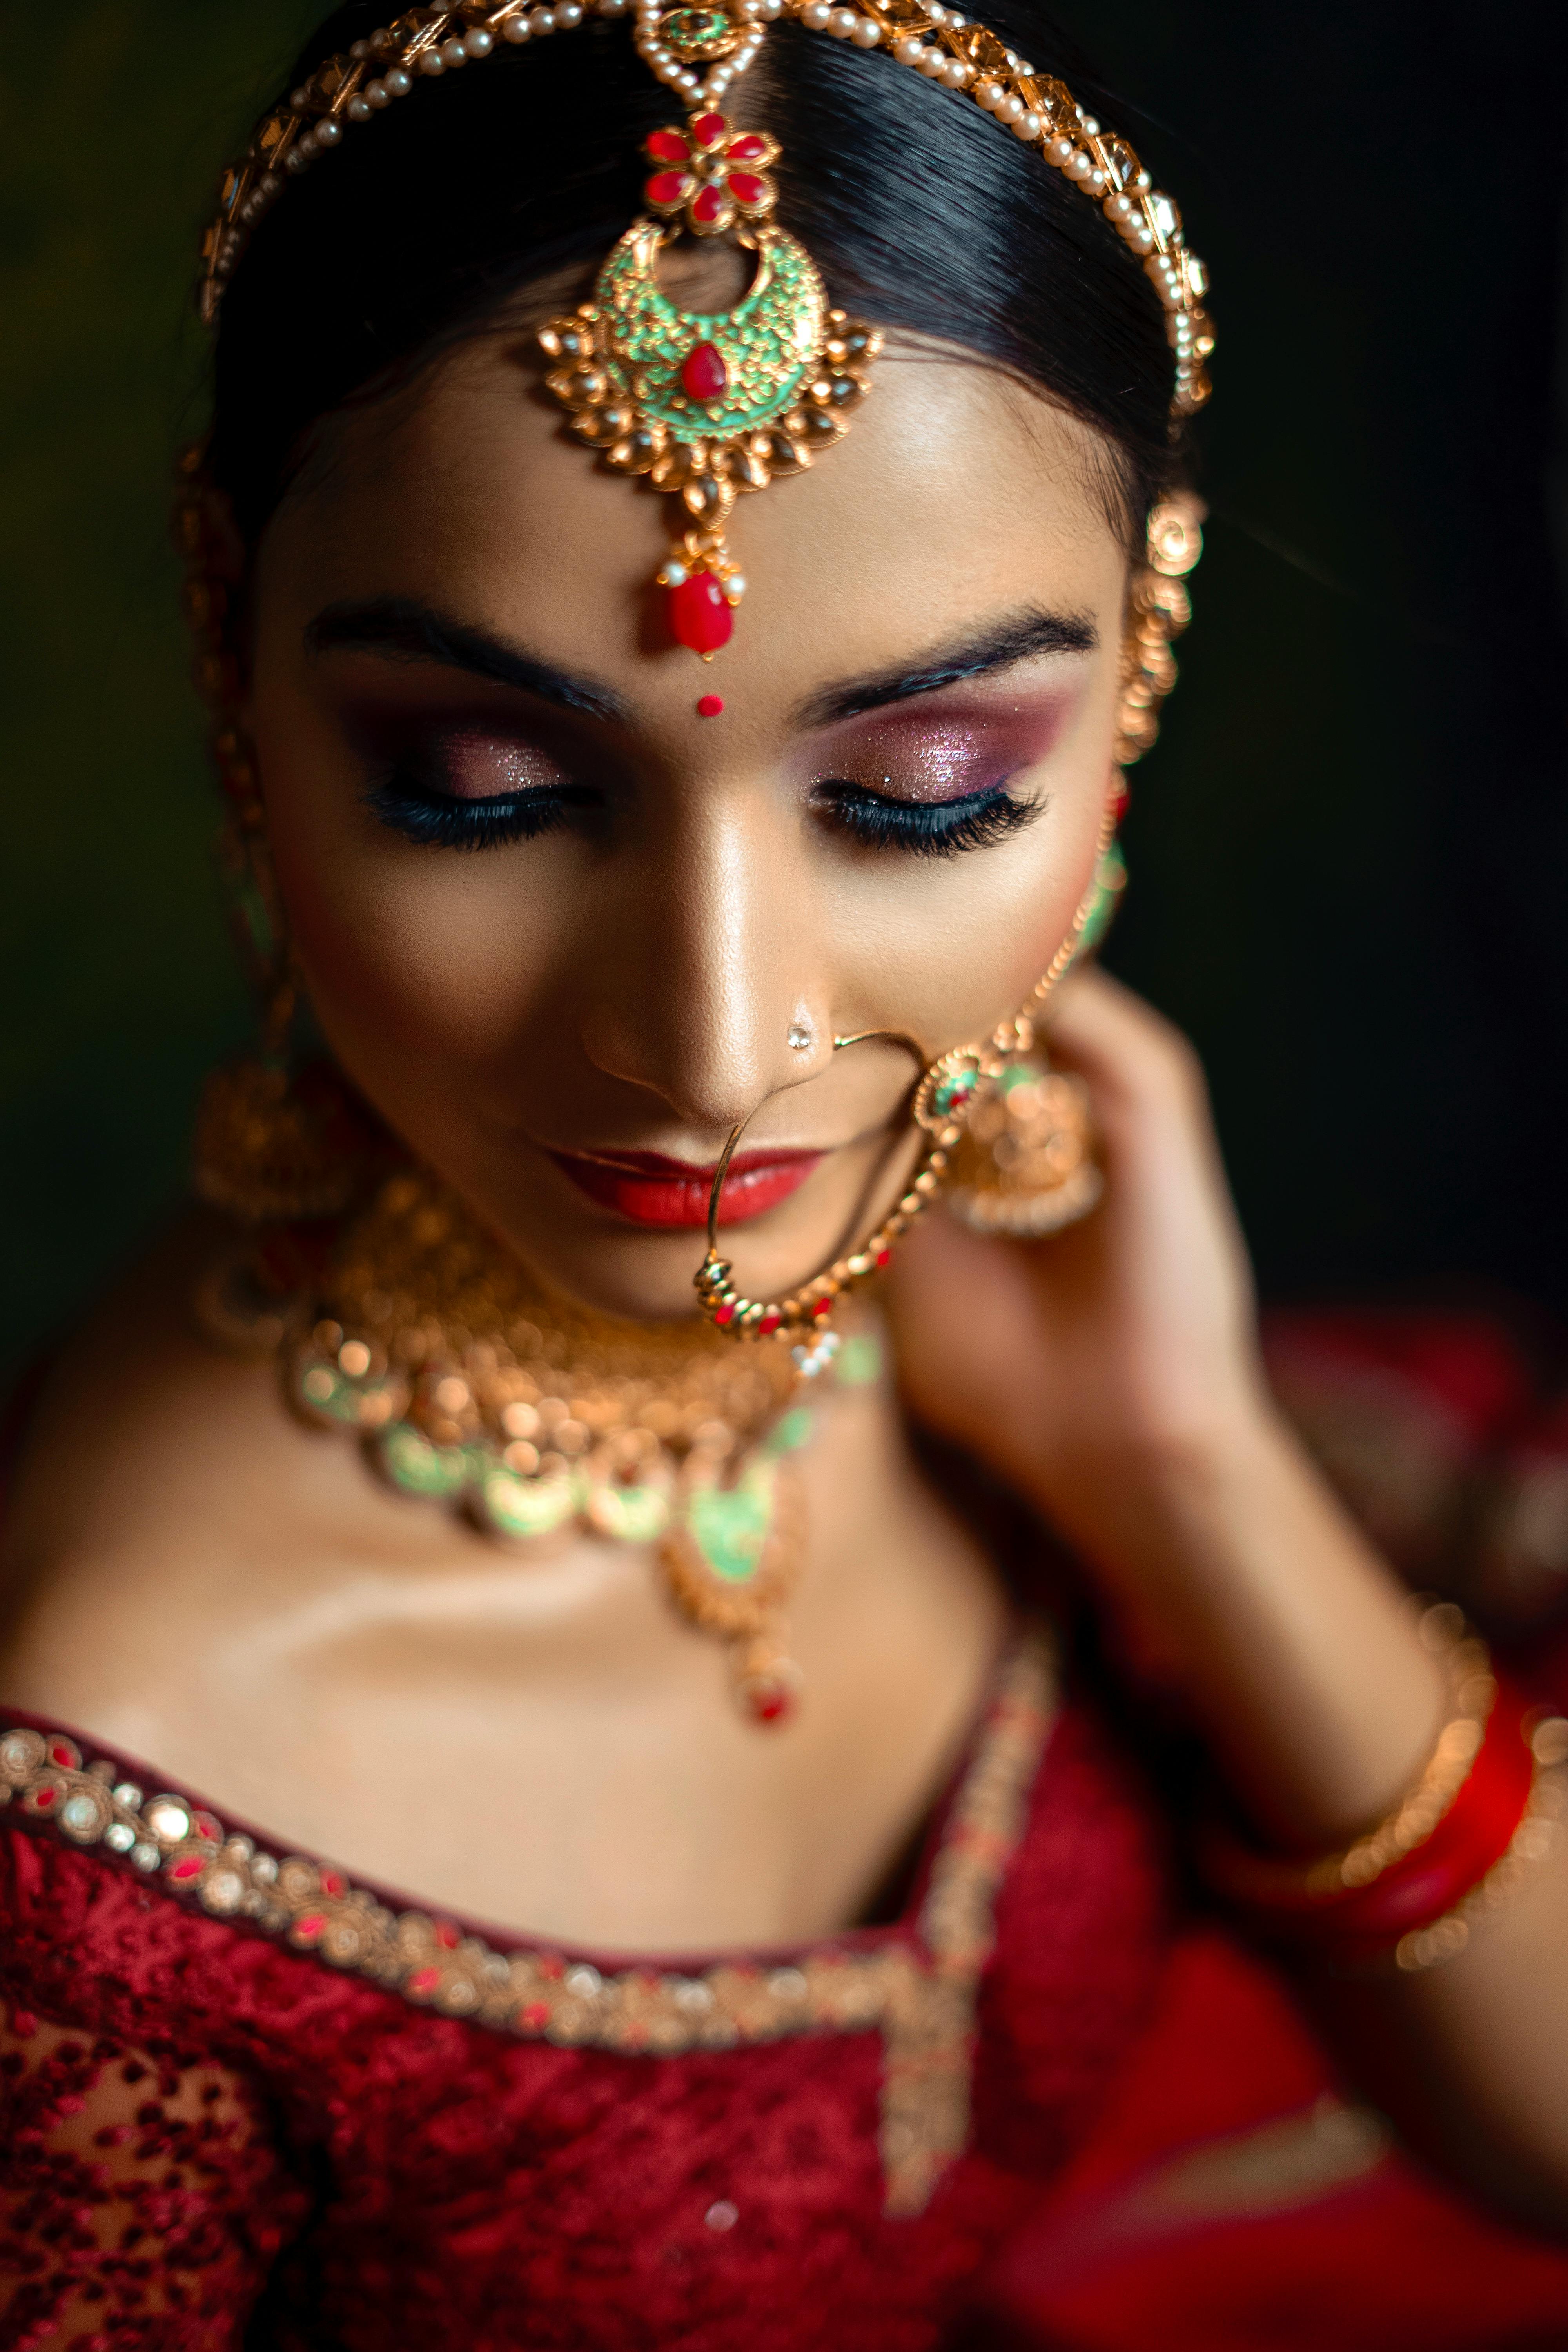 a portrait of an indian bride, intricate henna tattoos | Stable Diffusion